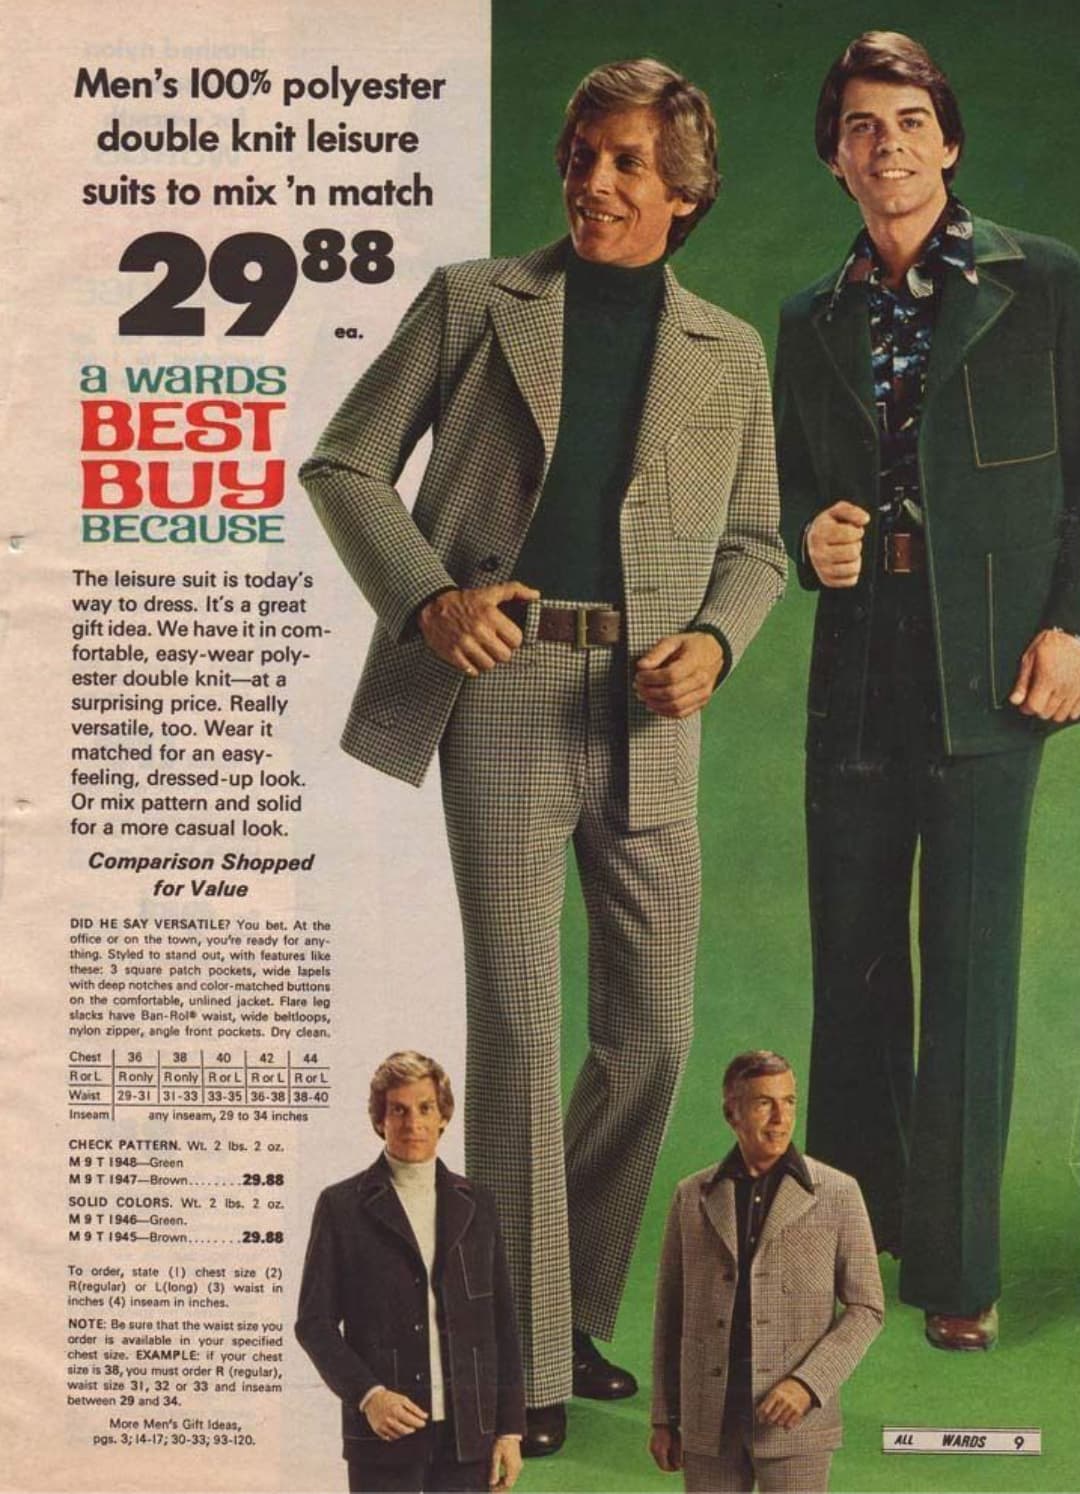 polyester suit 70s - Men's 100% polyester double knit leisure suits to mix 'n match 2988 a waRDS Best Buy Because The leisure suit is today's way to dress. It's a great gift idea. We have it in com fortable, easywear poly ester double knitat a surprising